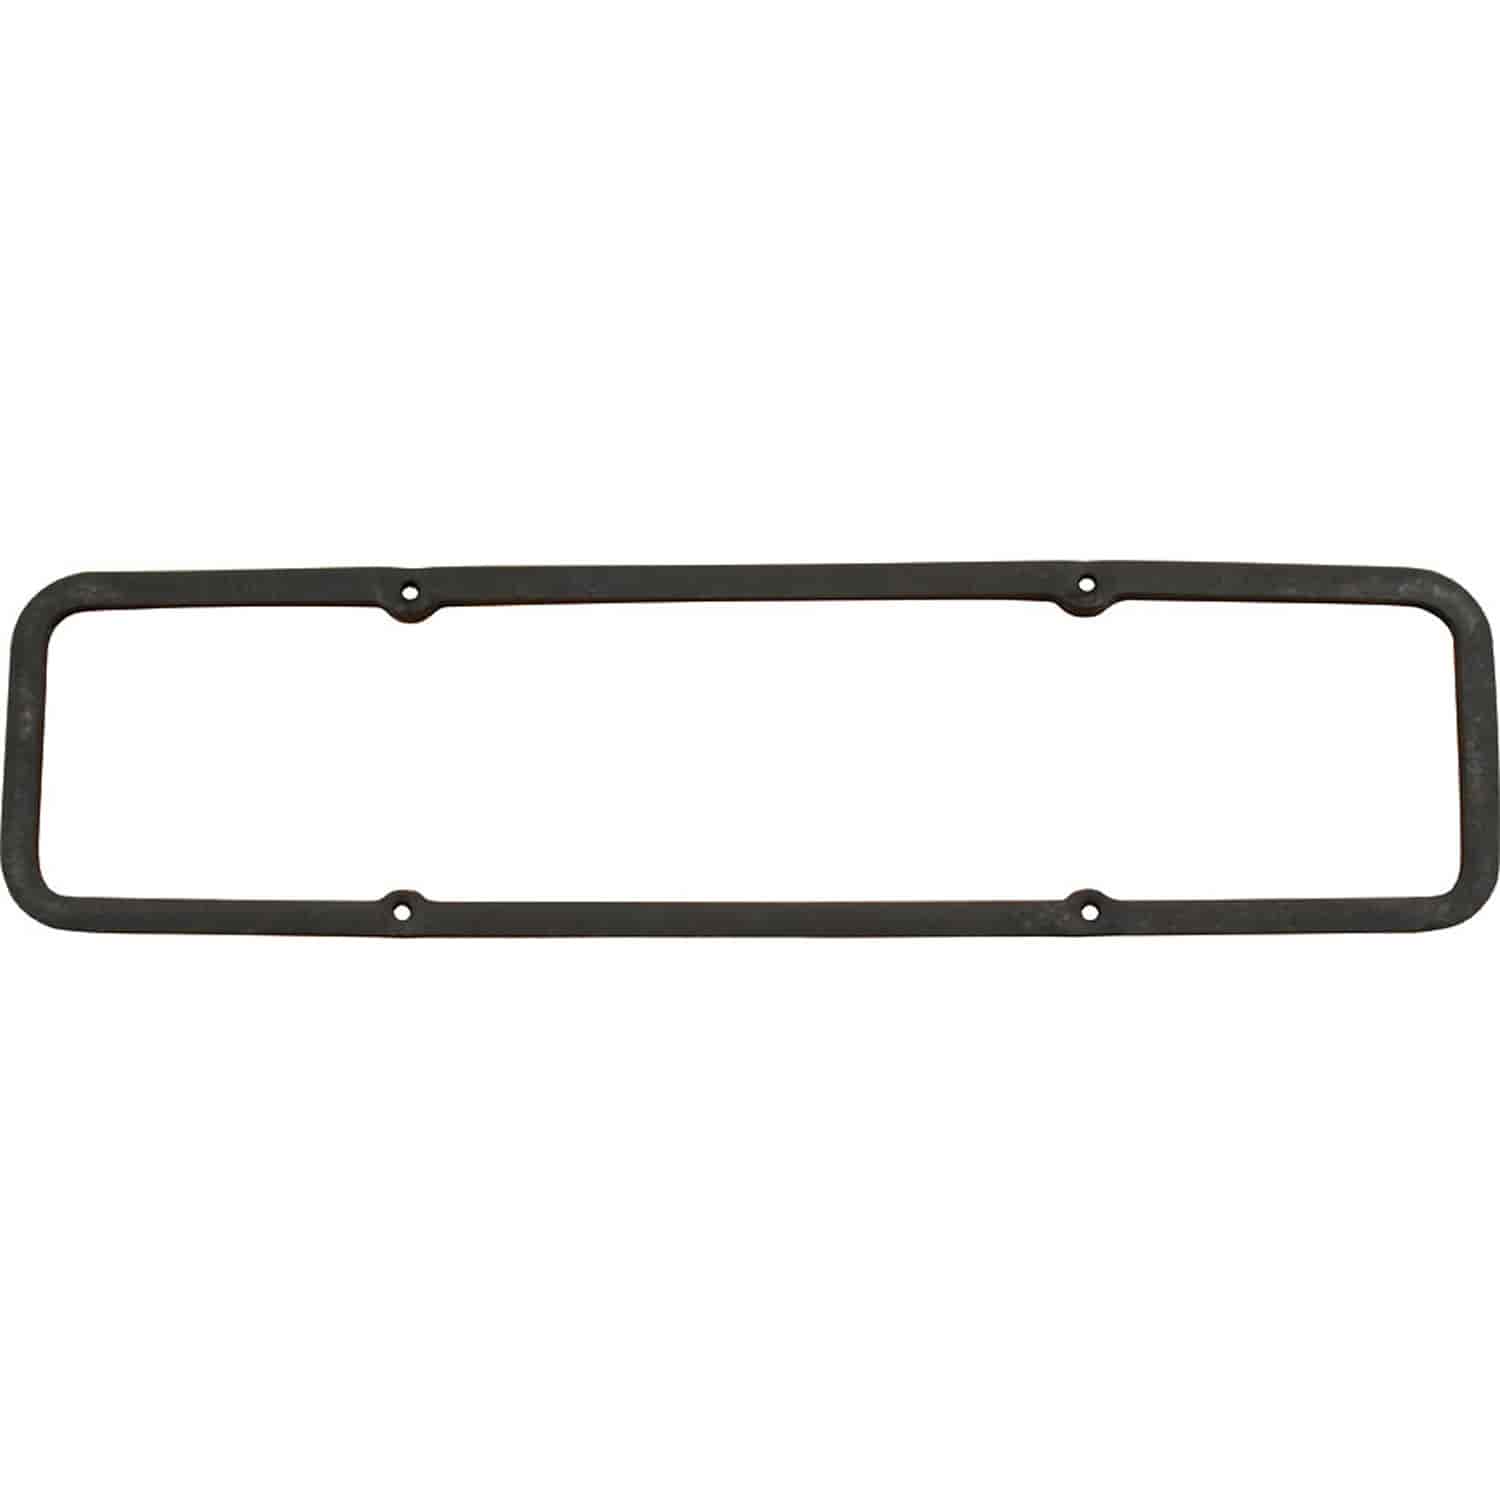 Small Block Chevy Valve Cover Gasket Thickness: 5/16